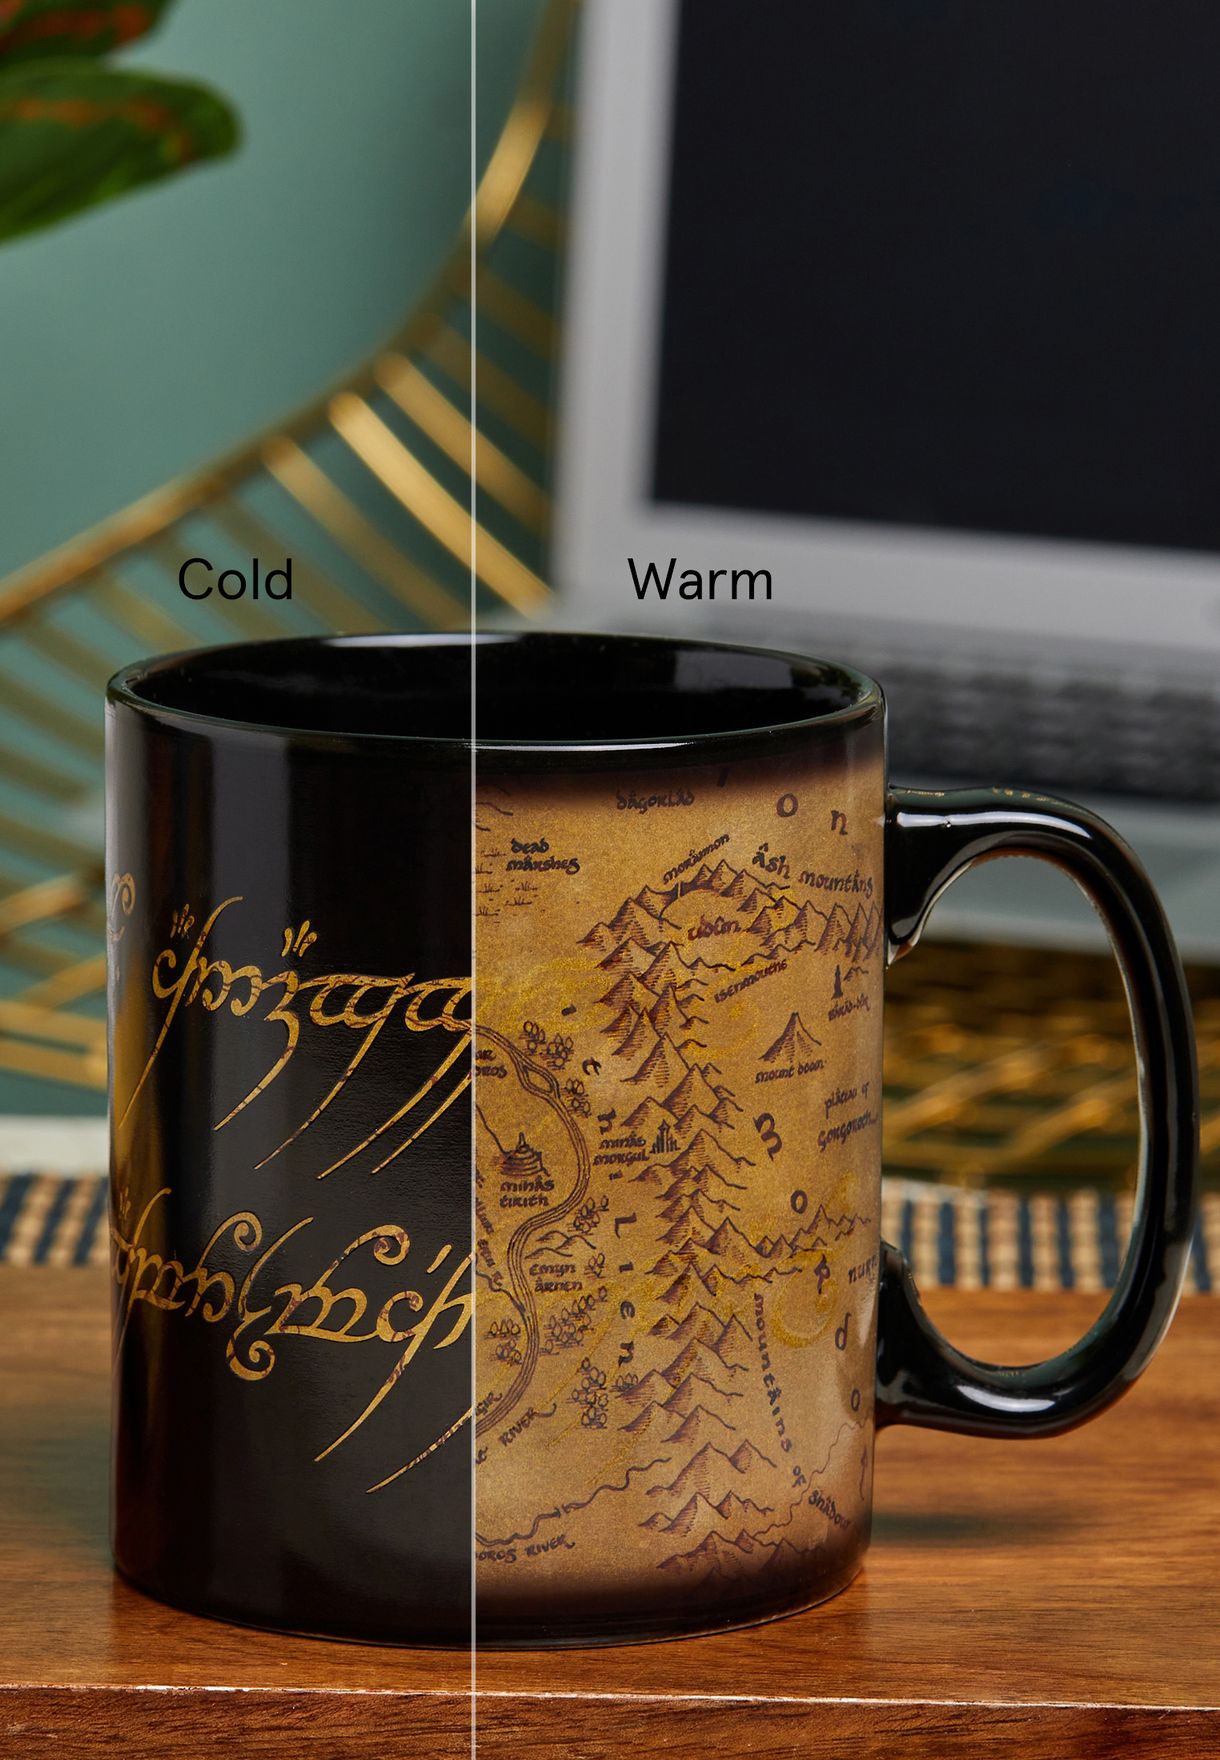 Official Licensed The Lord of the Rings Heat Changing Mug